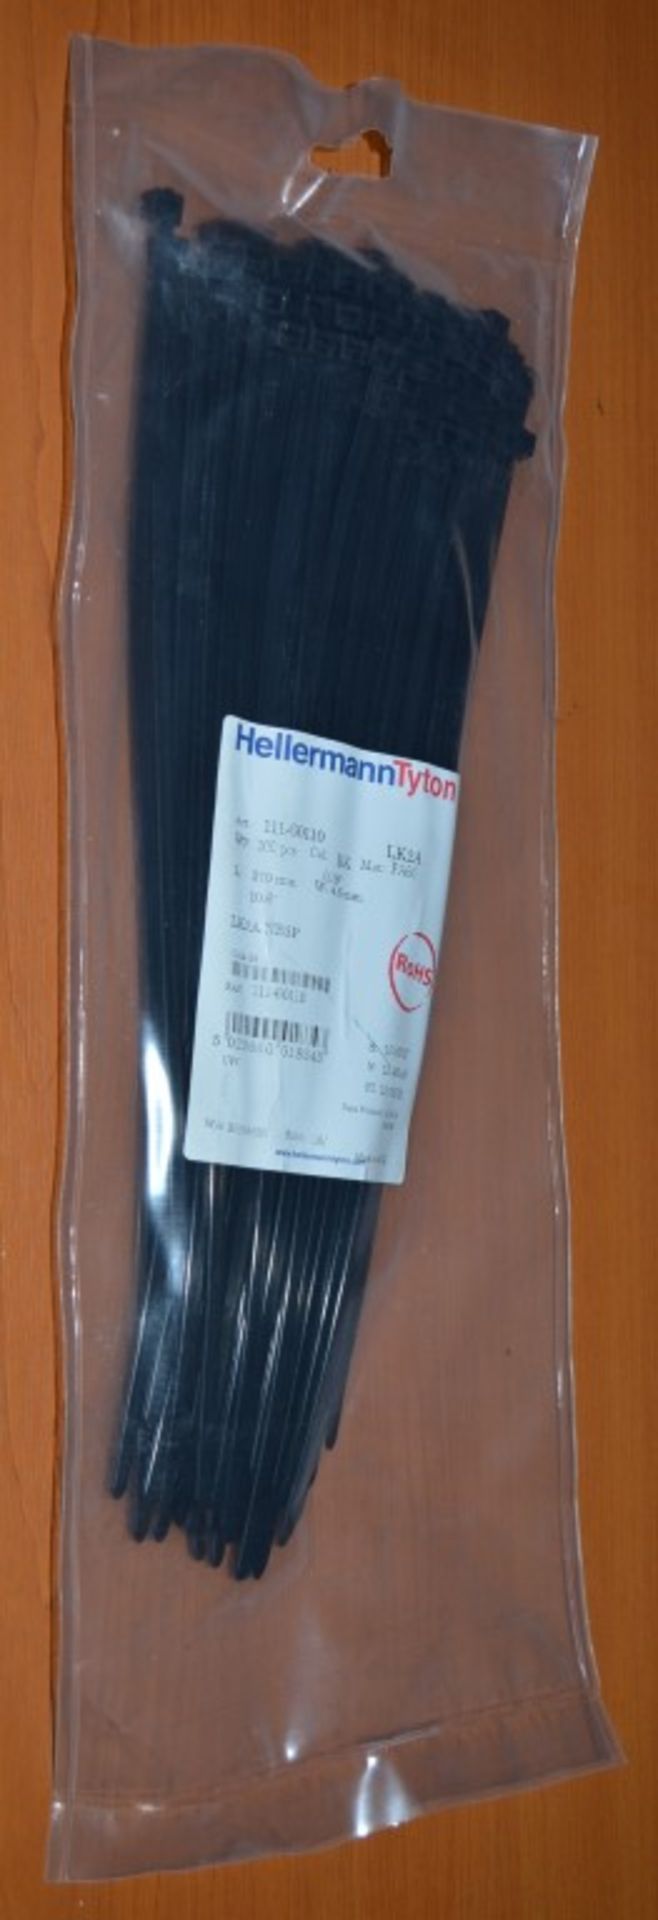 1,000 x Hellermann Tyton Black Nylon Non Releasable Cable Ties - 270mm x 4.6mm - LK Series - CL011 - - Image 3 of 4